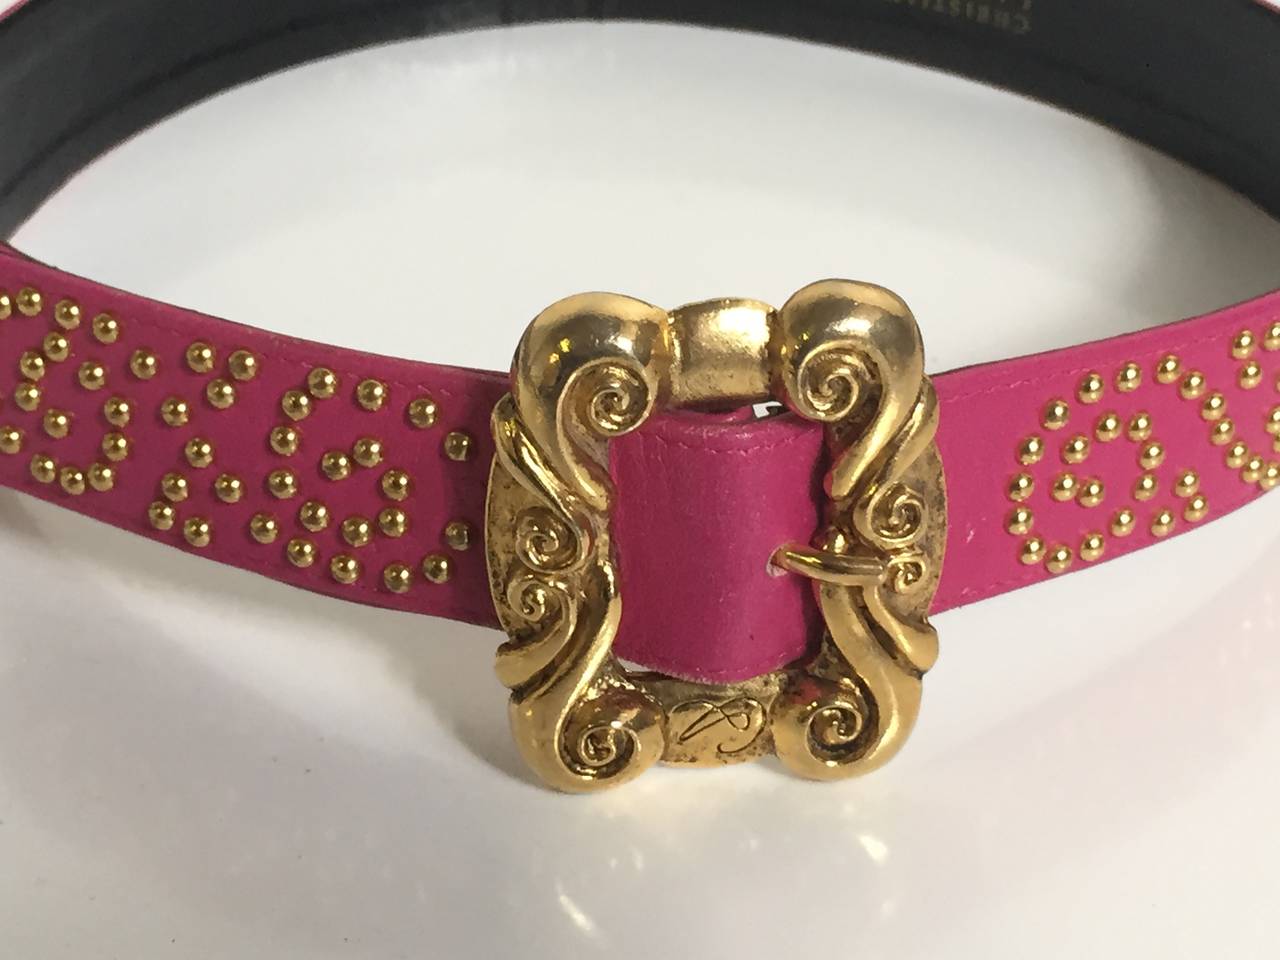 Christian Lacroix 1980s pink leather gold studded belt made in France size small. The belt is 32